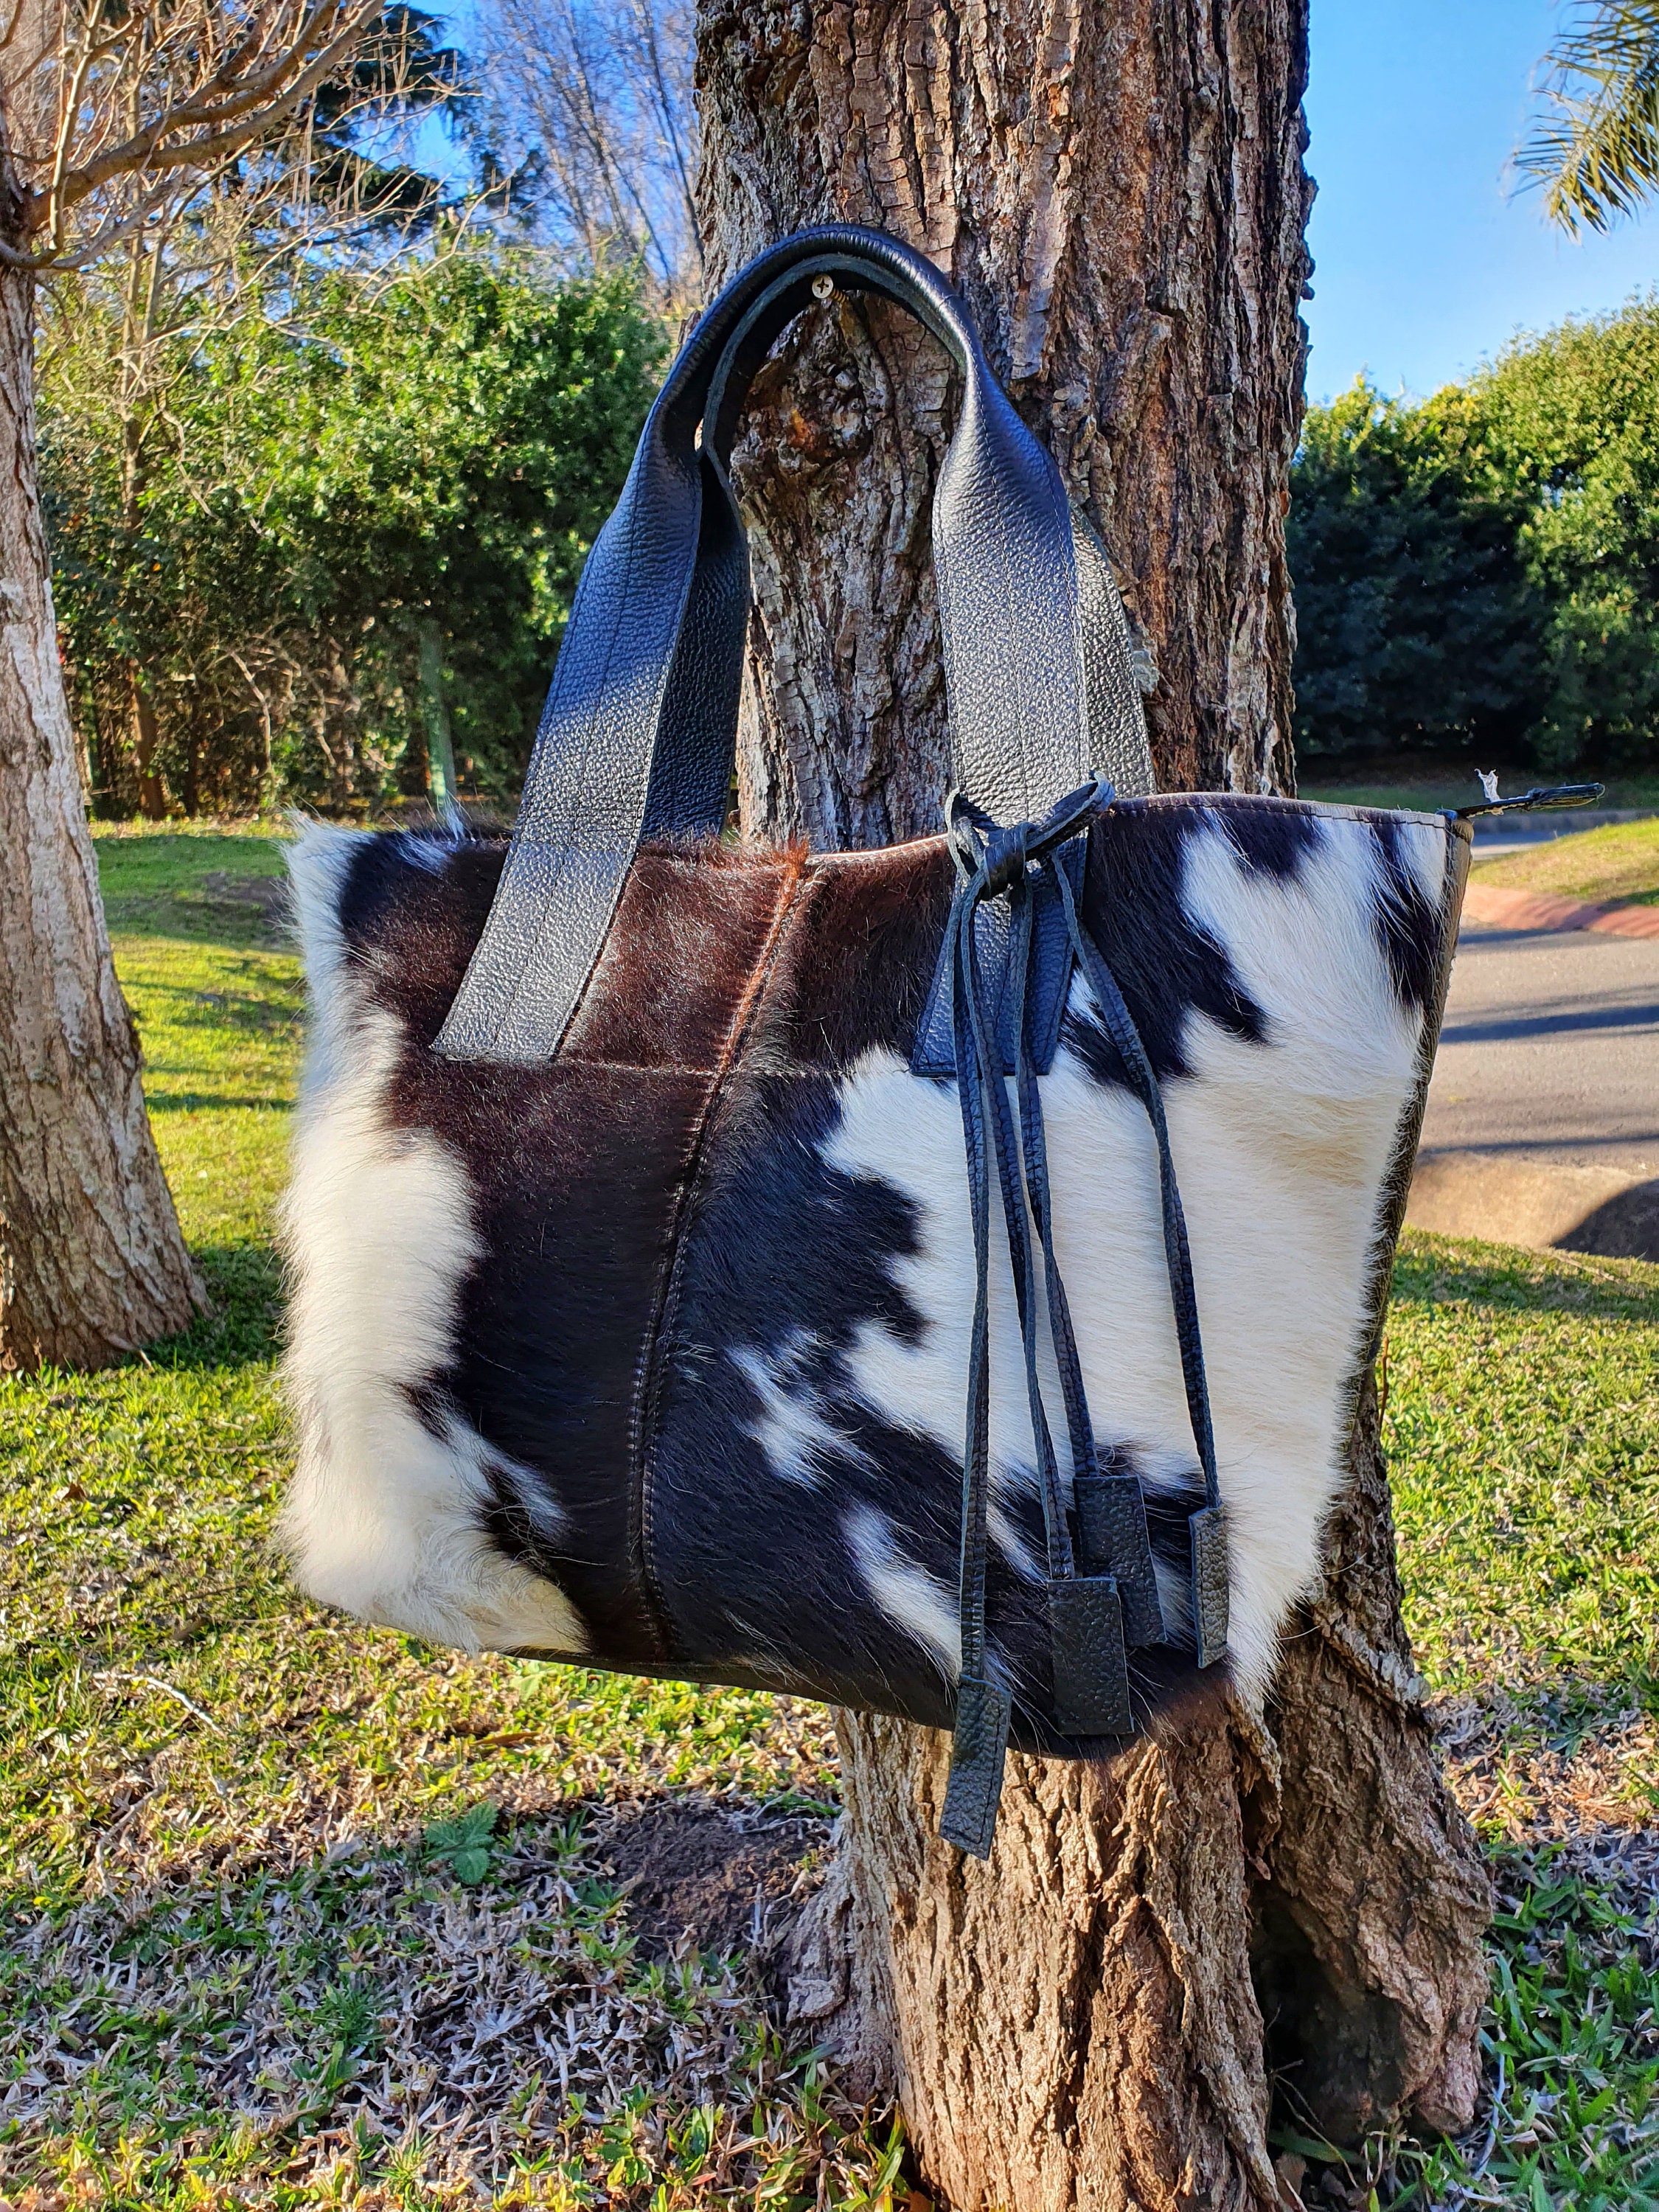 Find out how I Cured My Cowhide Weekender Bag In 2 Days – Telegraph